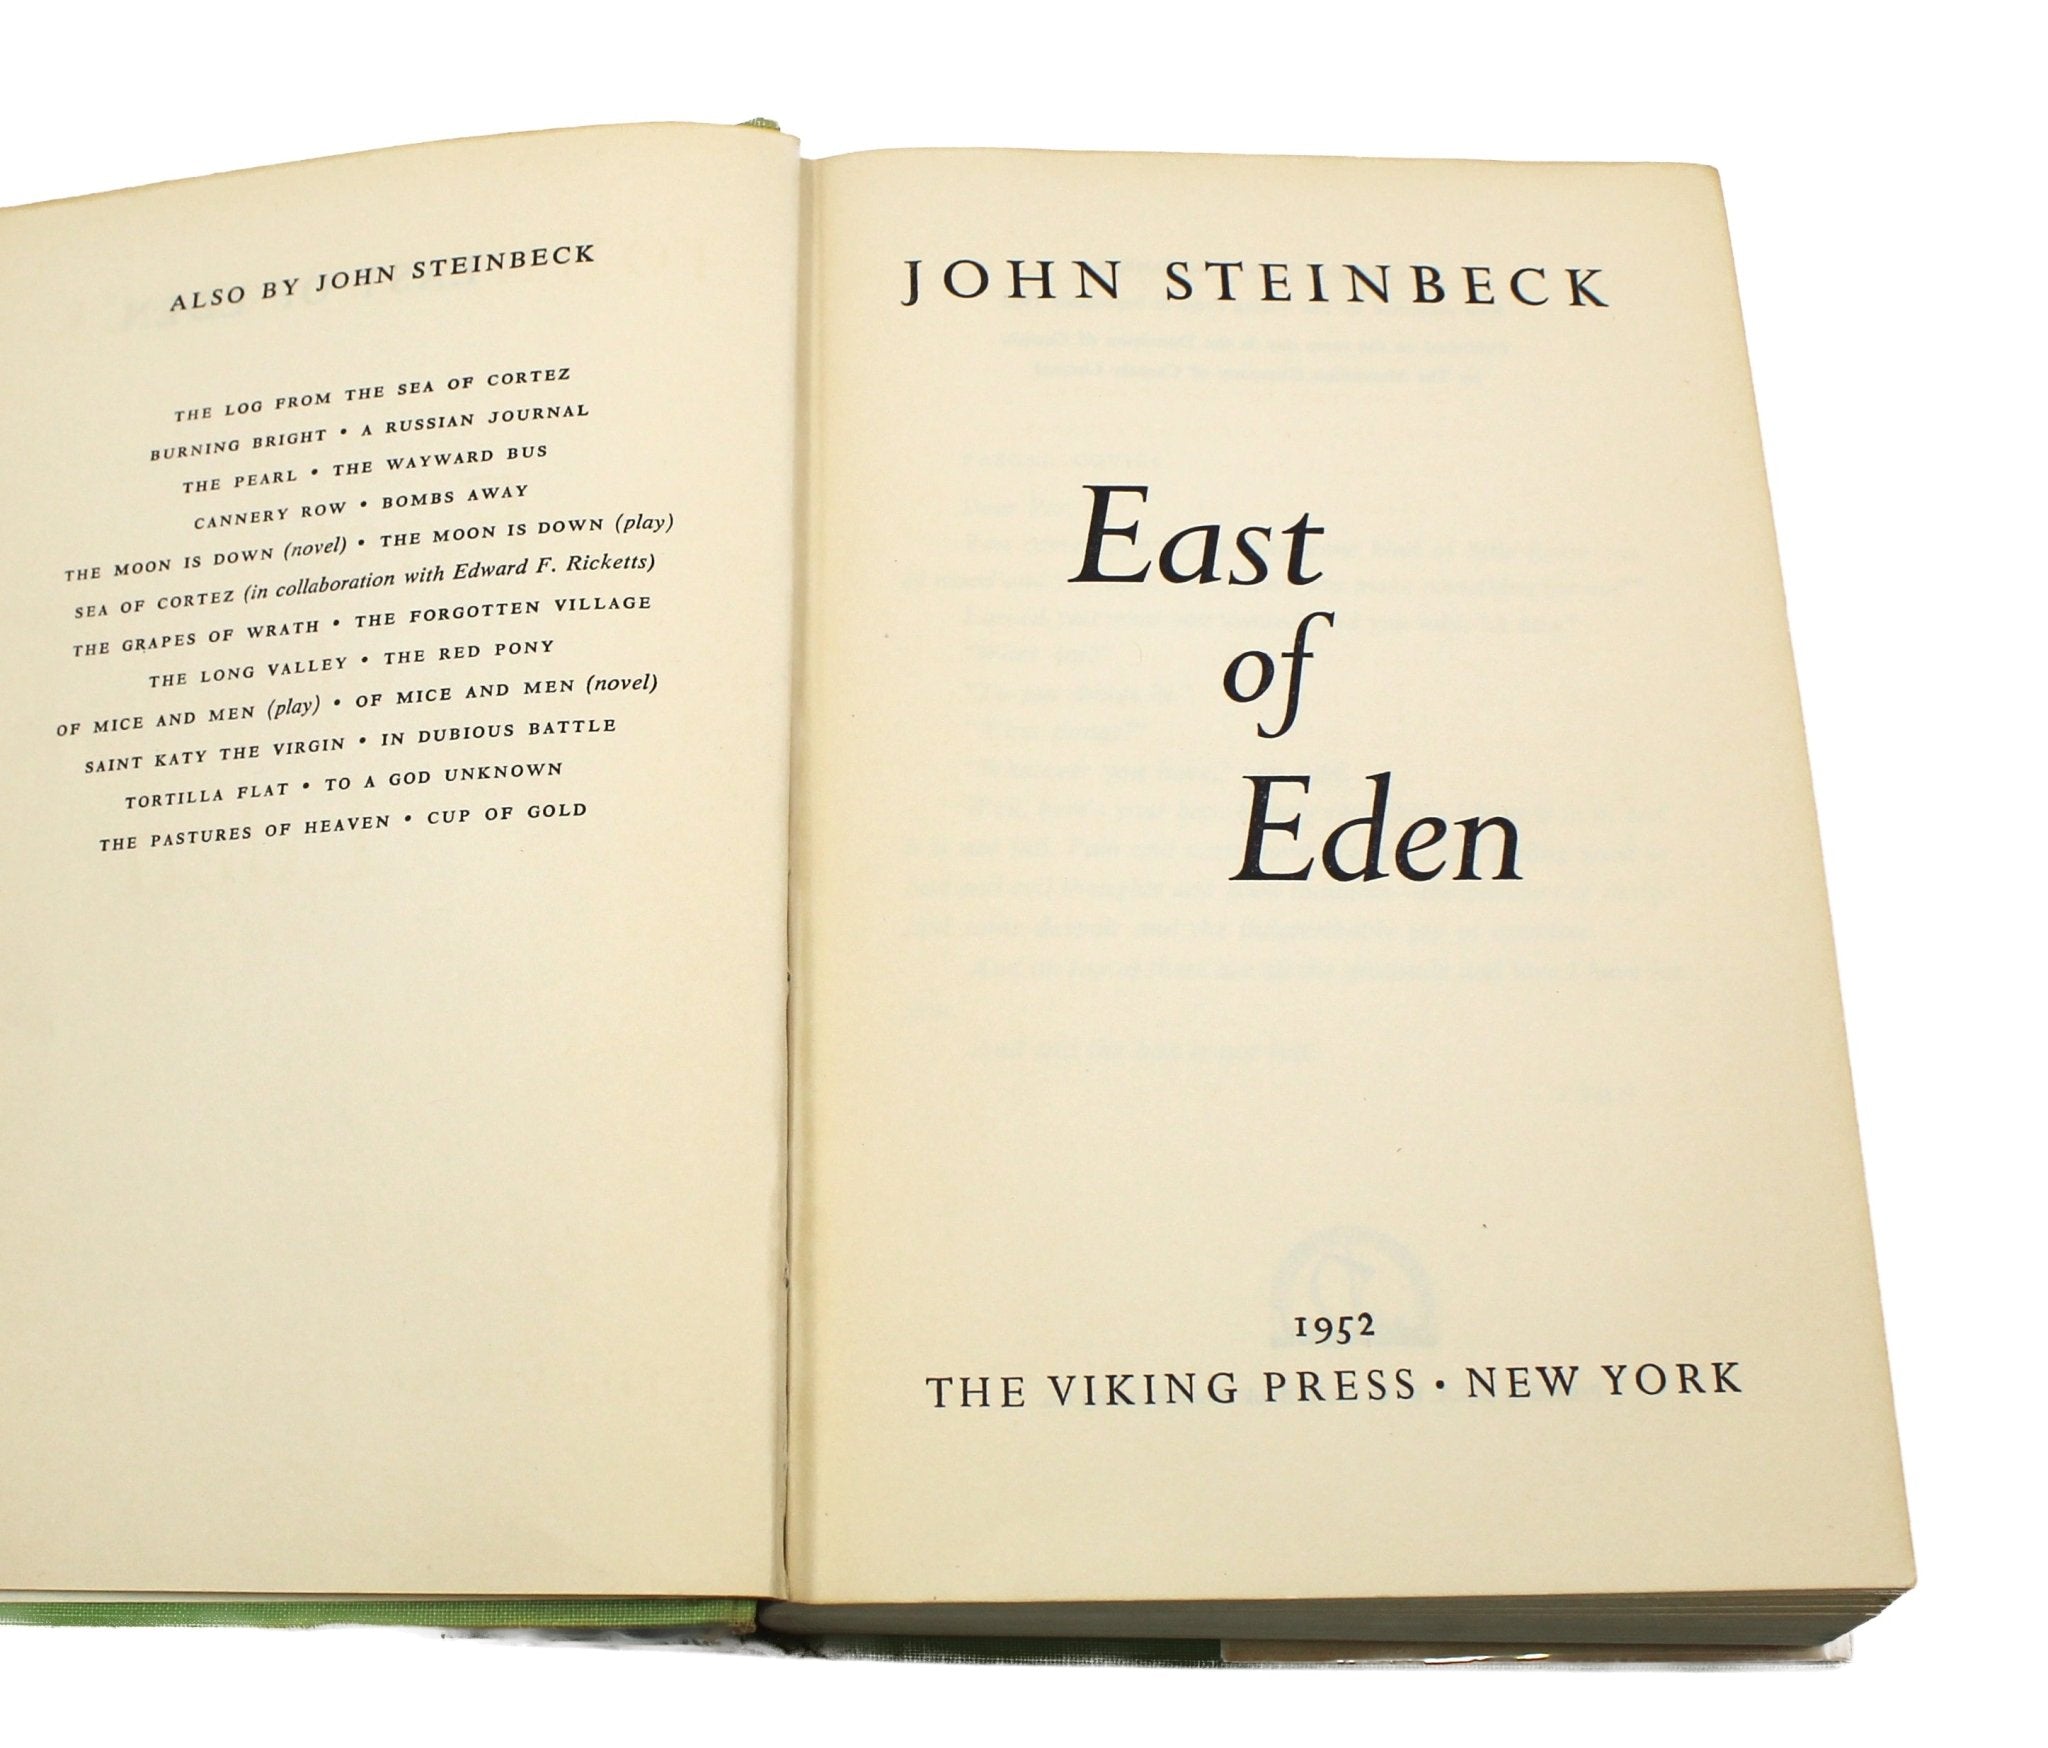 East of Eden by John Steinbeck, First Trade Edition, in Original Dust Jacket, 1952 - The Great Republic